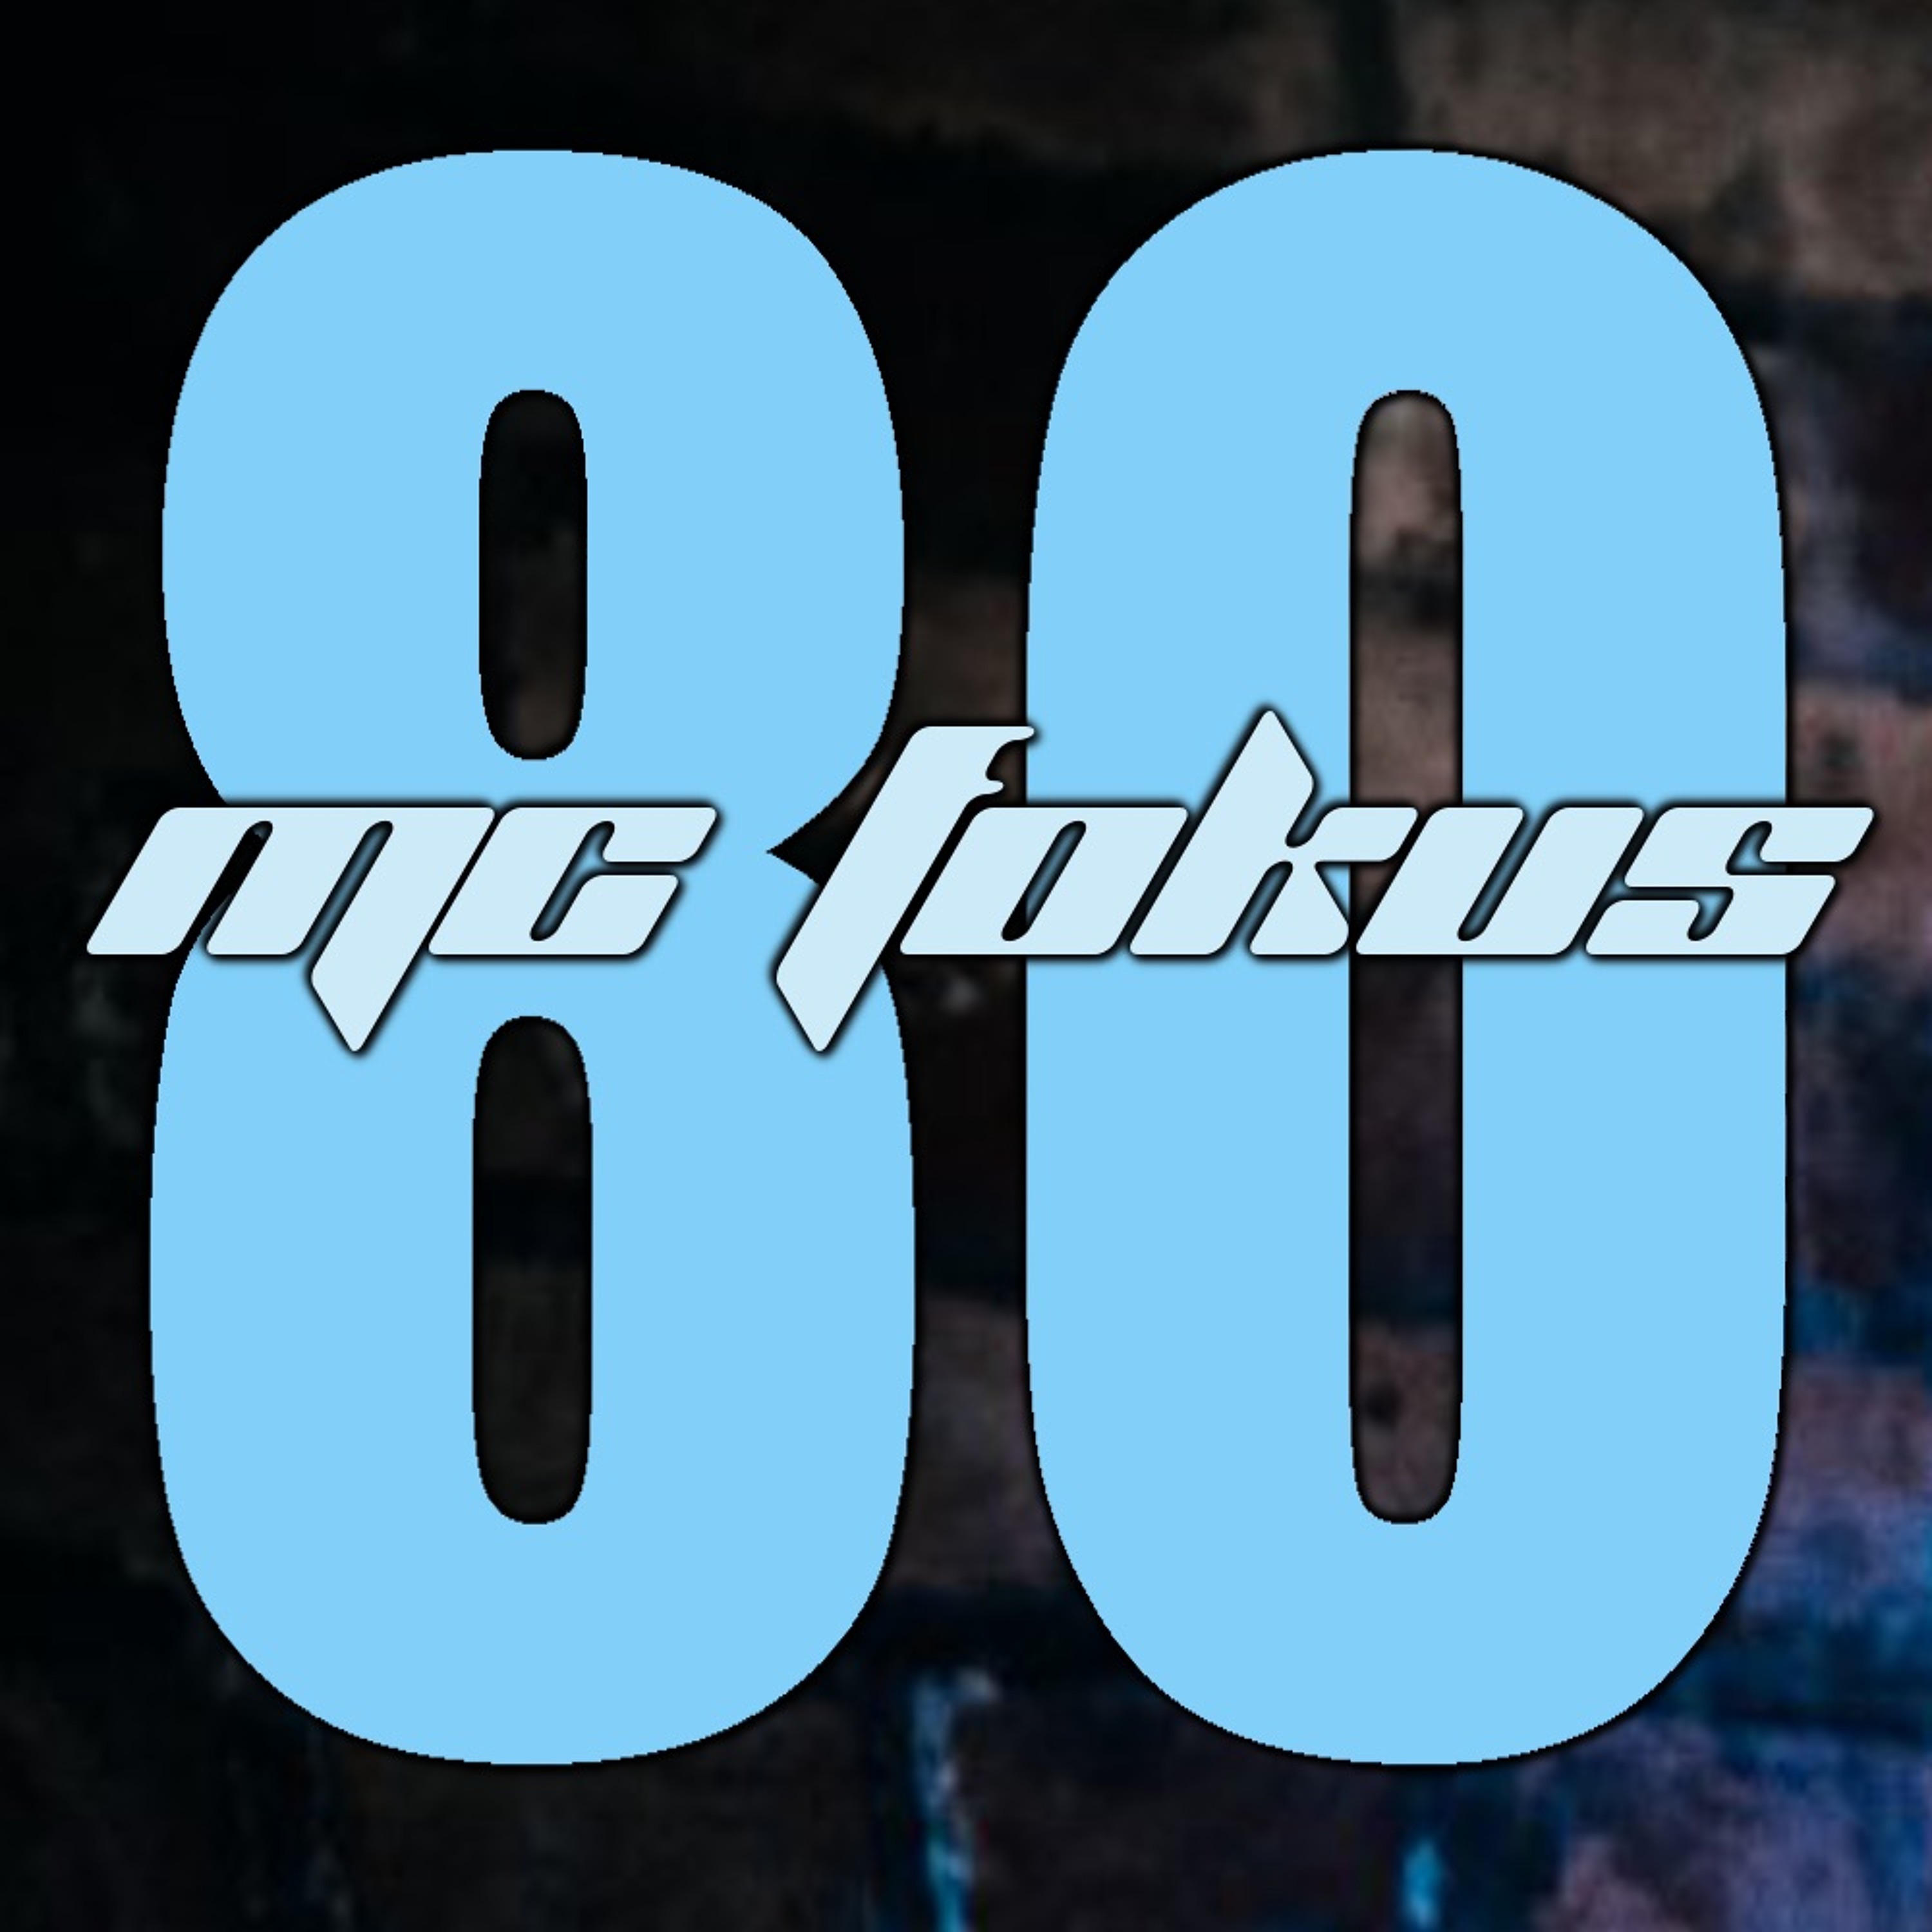 Back To The Future #80 - The Eruption Sessions with MC Fokus